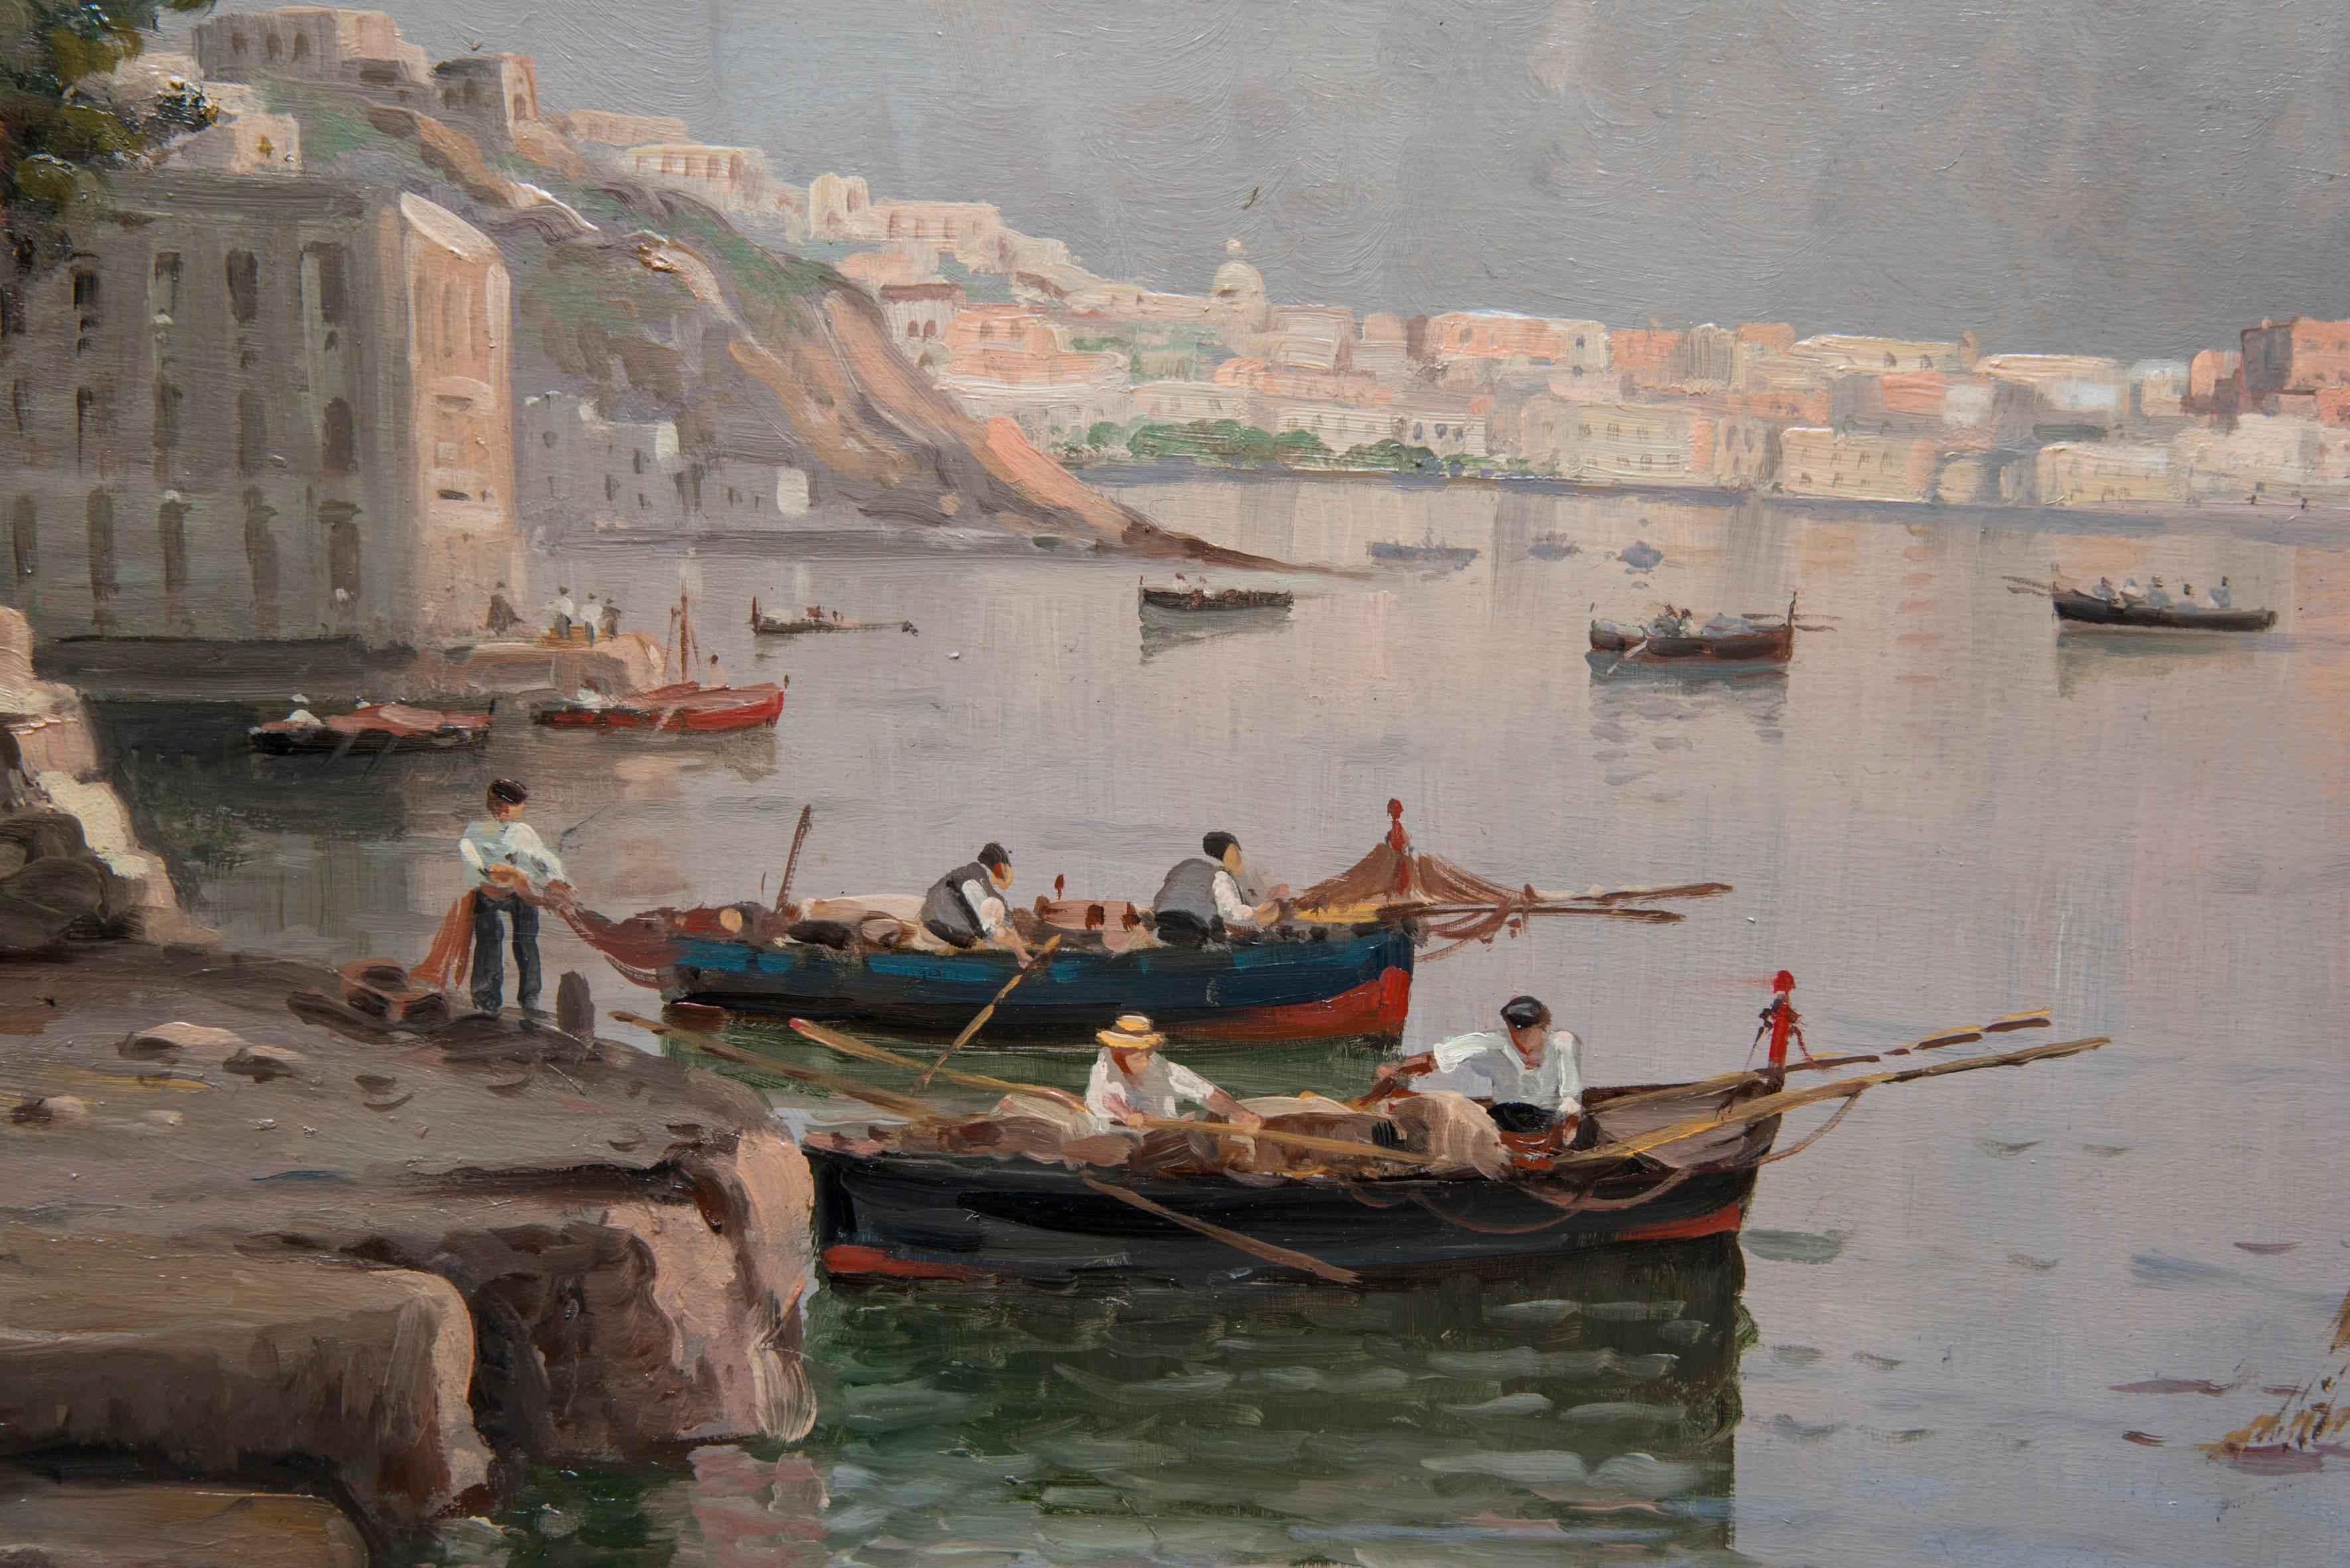 Nicolas de Corsi born in Odessa in 1882 and died in Naples in 1956.
View of the bay of Naples oil on wood
Signed lower left measuring 92 x 120 cm
Exhibition at the Salon des artistes français in 1926 and 1928.